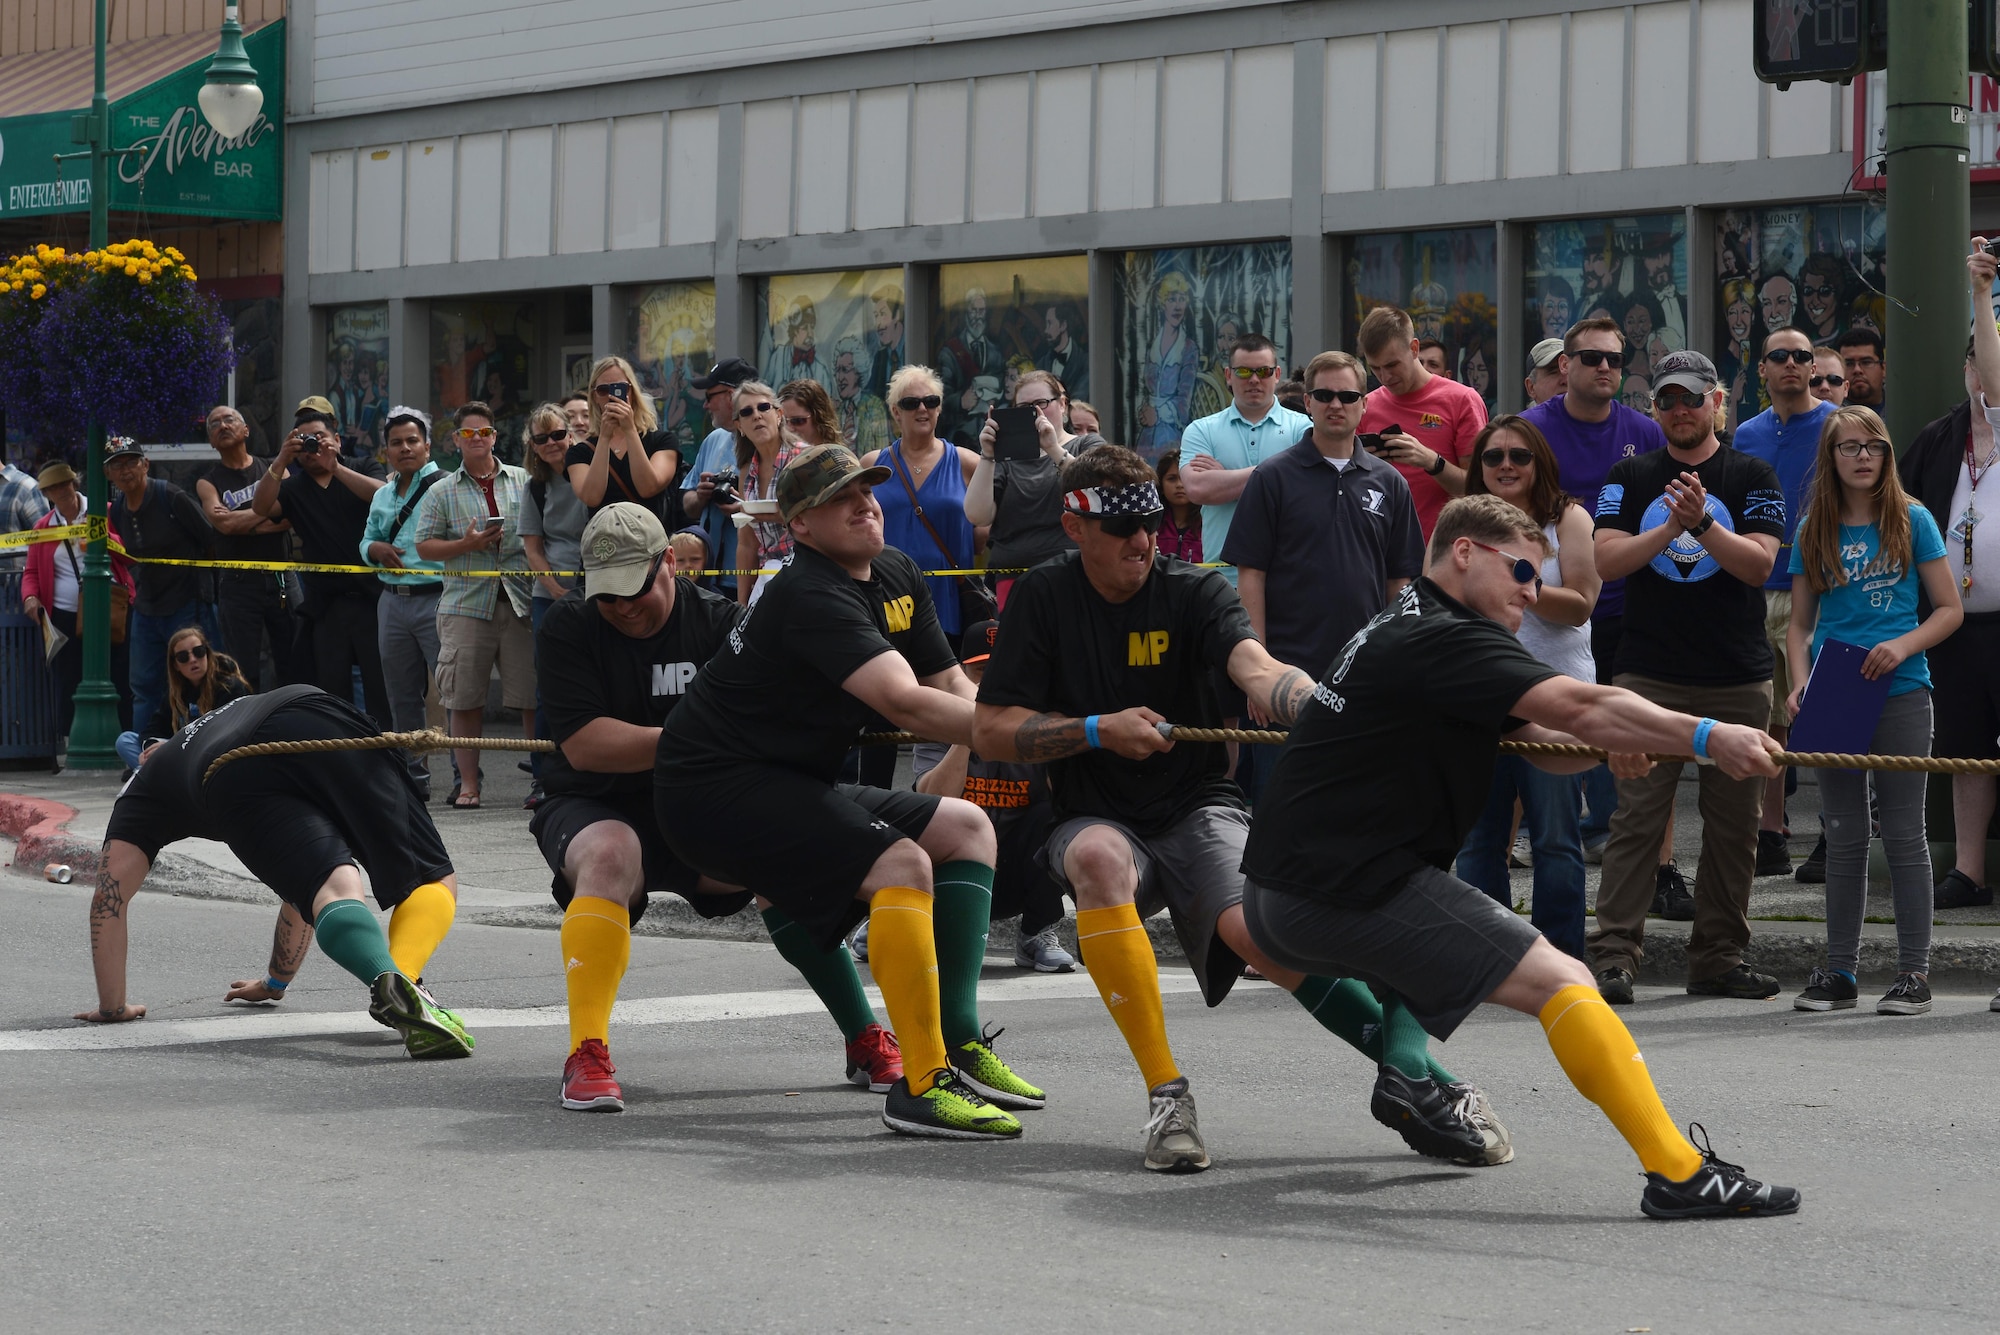 The ‘Arctic Defenders,’ of the 545th Military Police Company, competes in a tug-of-war challenge as part of the Hero Games during the Downtown Summer Solstice Festival in Anchorage, Alaska, June 18, 2016. Tug-of-war was the semi-final challenge to determine the final two teams. The Hero Games is a friendly competition between Alaska’s first responders with challenges that require balance, strength and teamwork. (U.S. Air Force photo Airman 1st Class Christopher R. Morales)